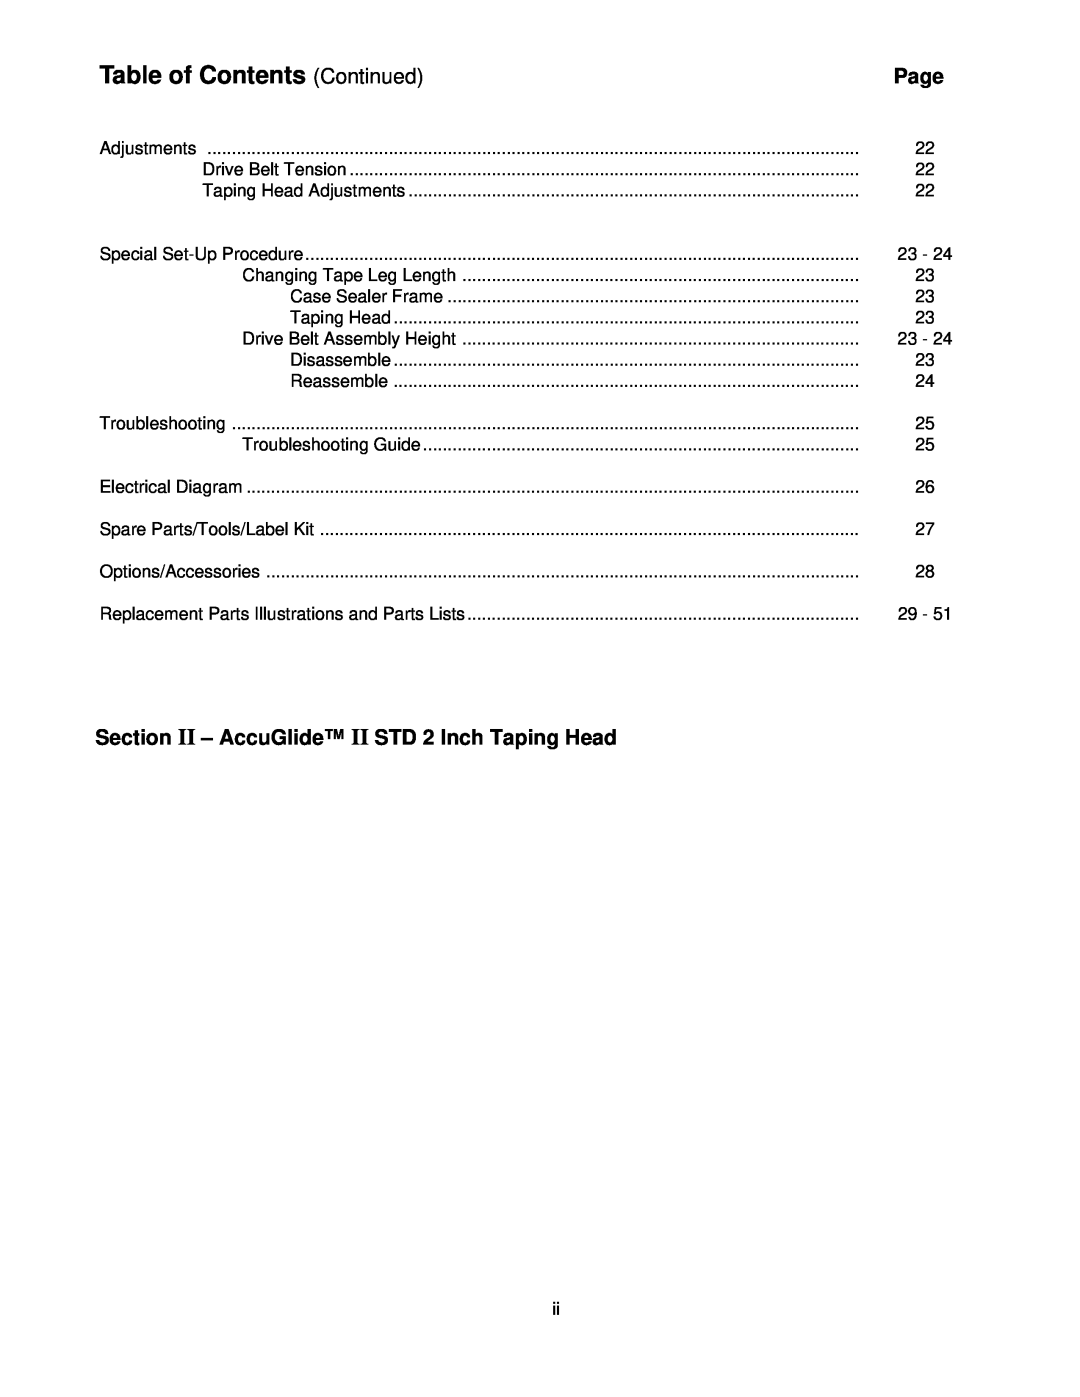 3M 800ab 39600 manual Table of Contents Continued, Page, Section II - AccuGlide II STD 2 Inch Taping Head 